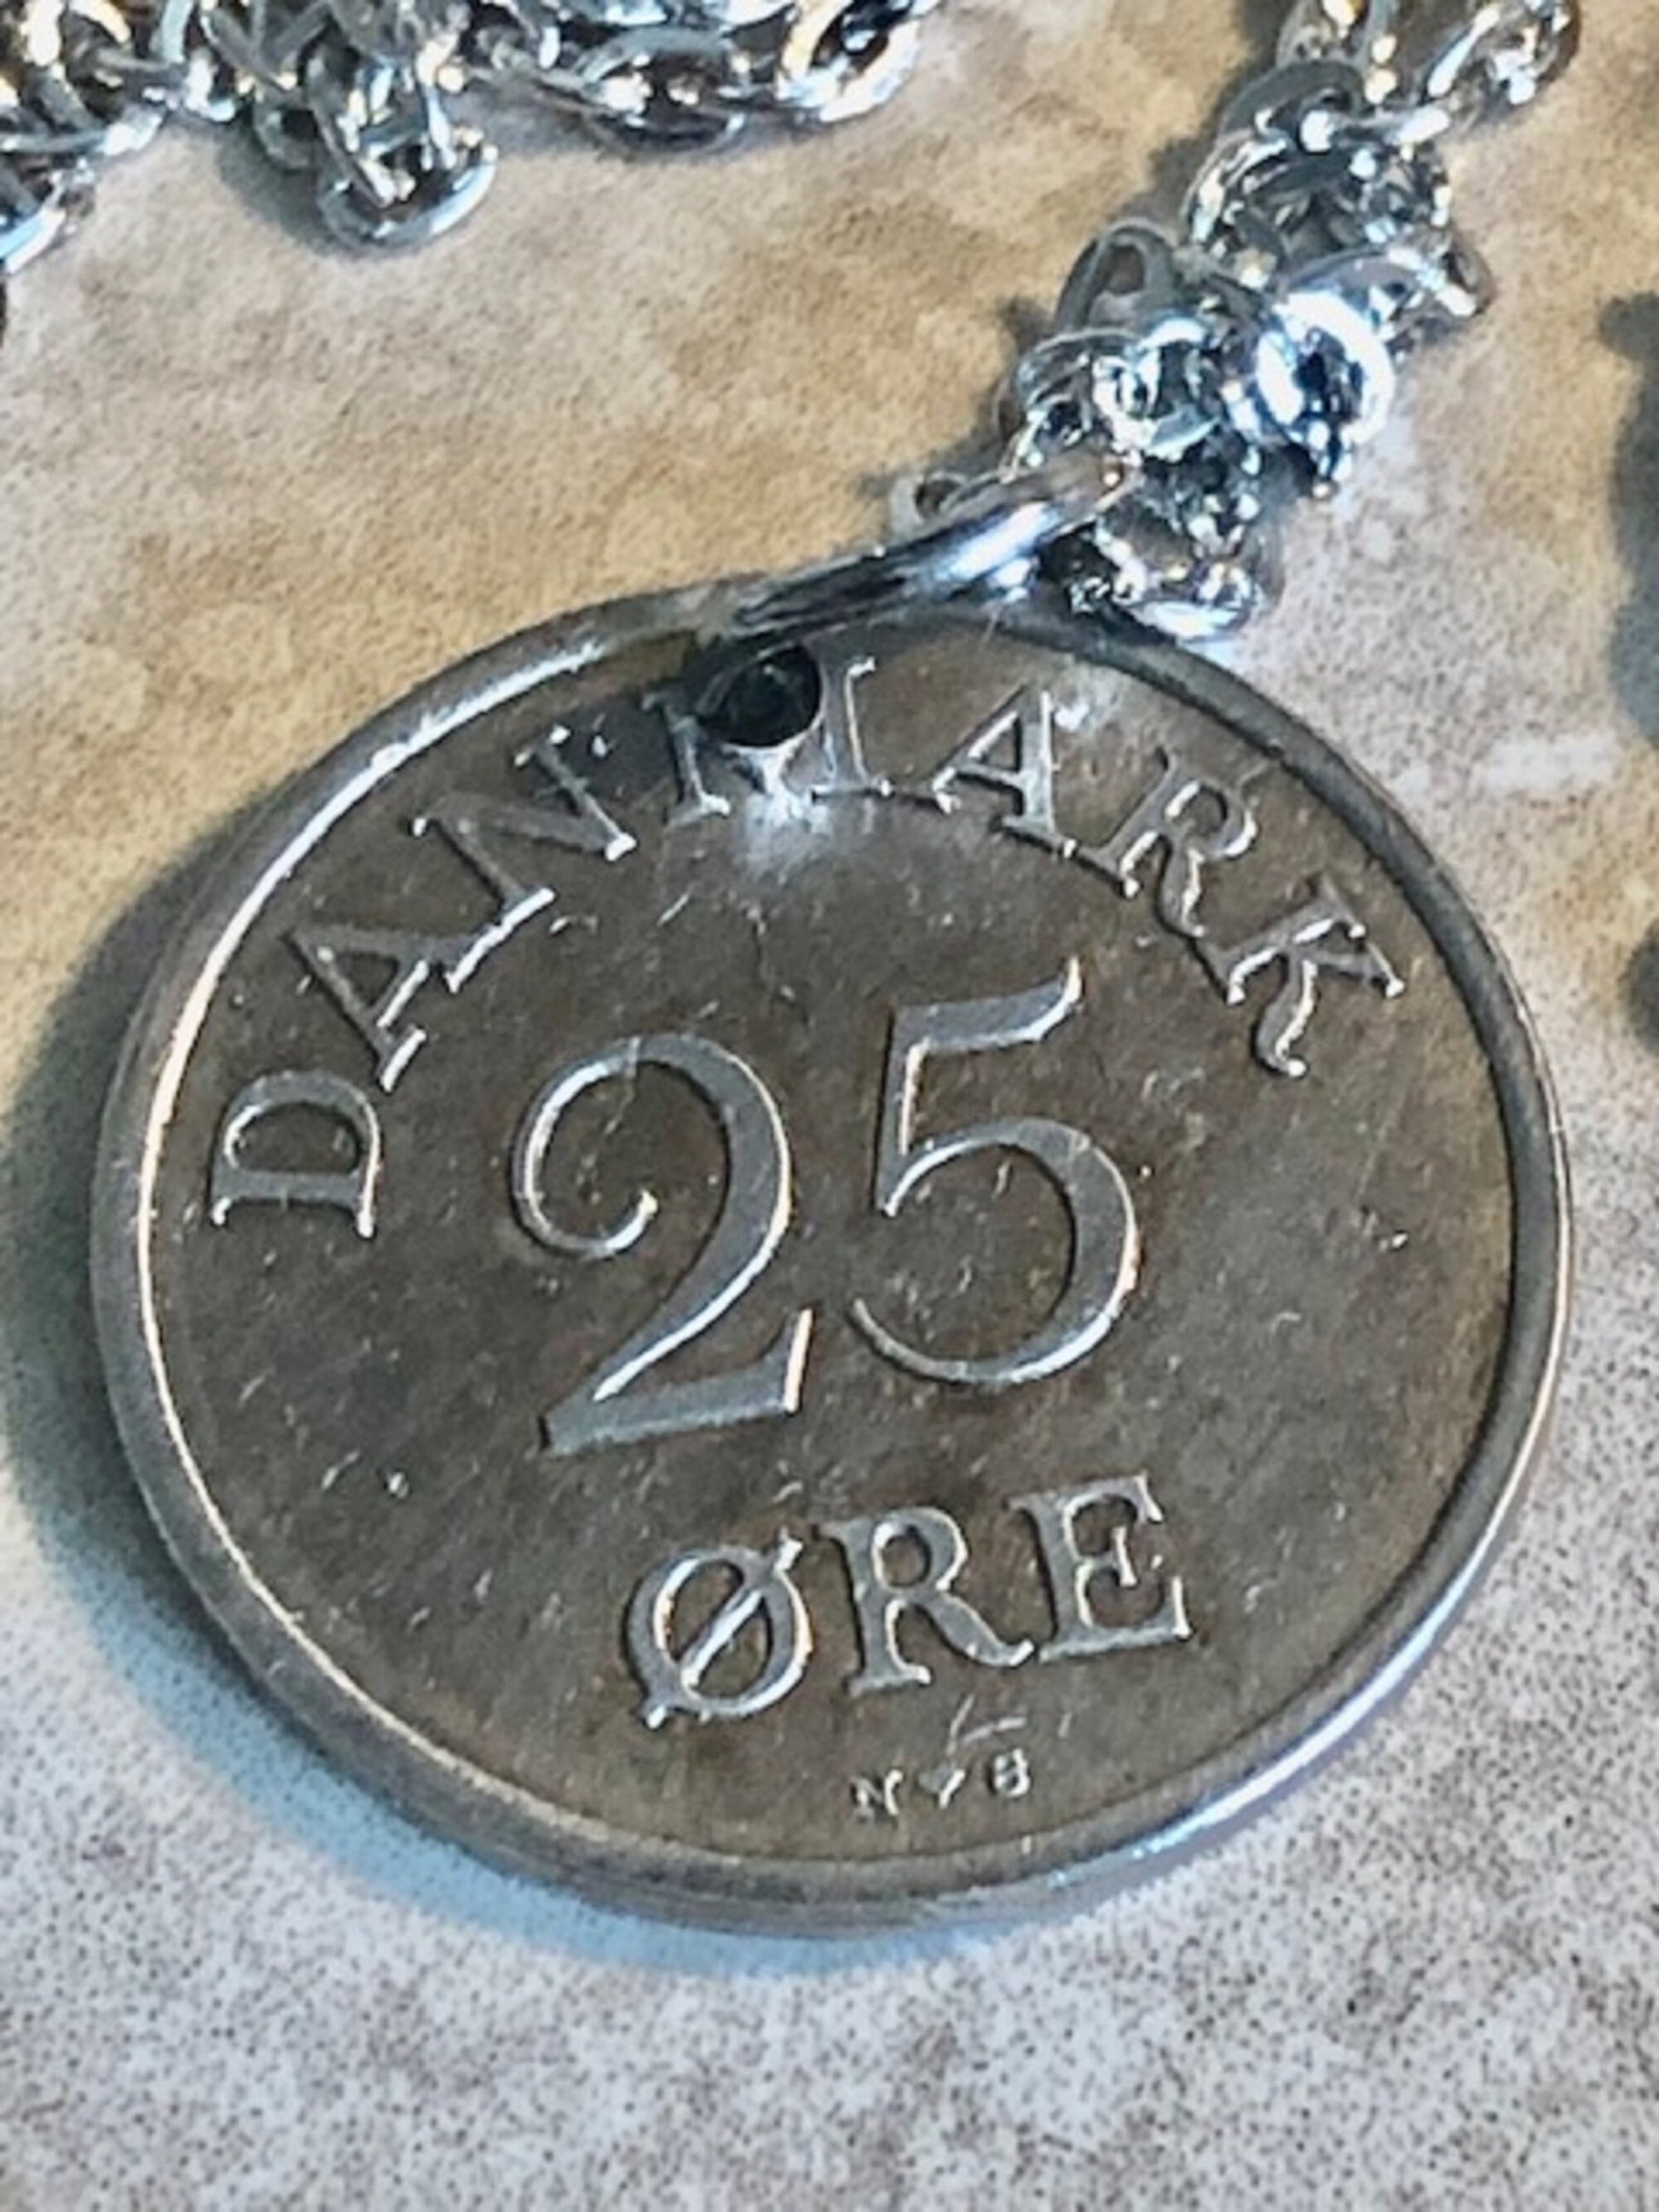 Denmark Coin Pendant 25 Ore Danmark Personal Necklace Old Vintage Handmade Jewelry Gift Friend Charm For Him Her World Coin Collector